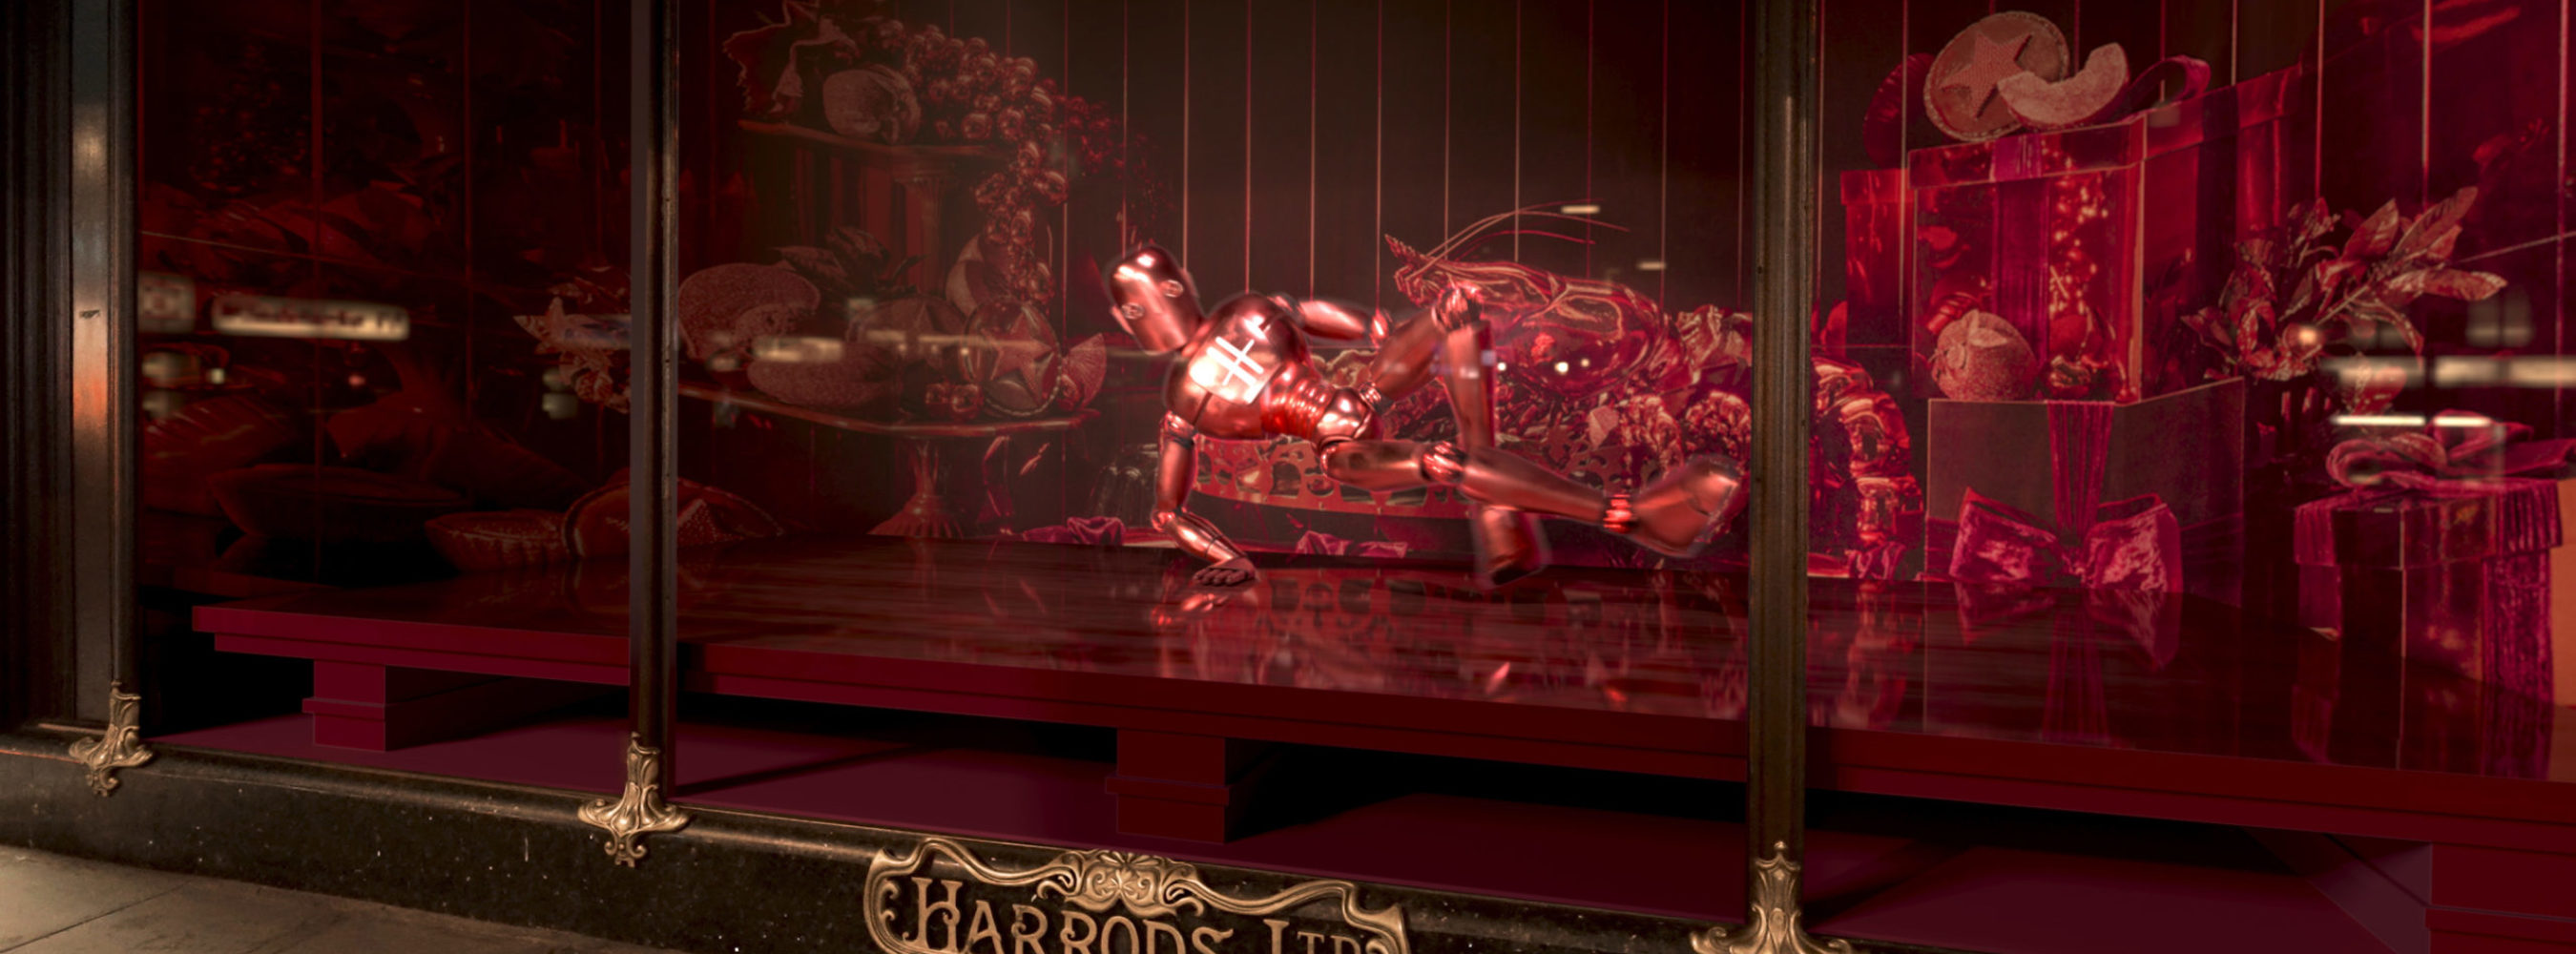 Harrods – Witness a Spectacle – Augmented Reality Window Display